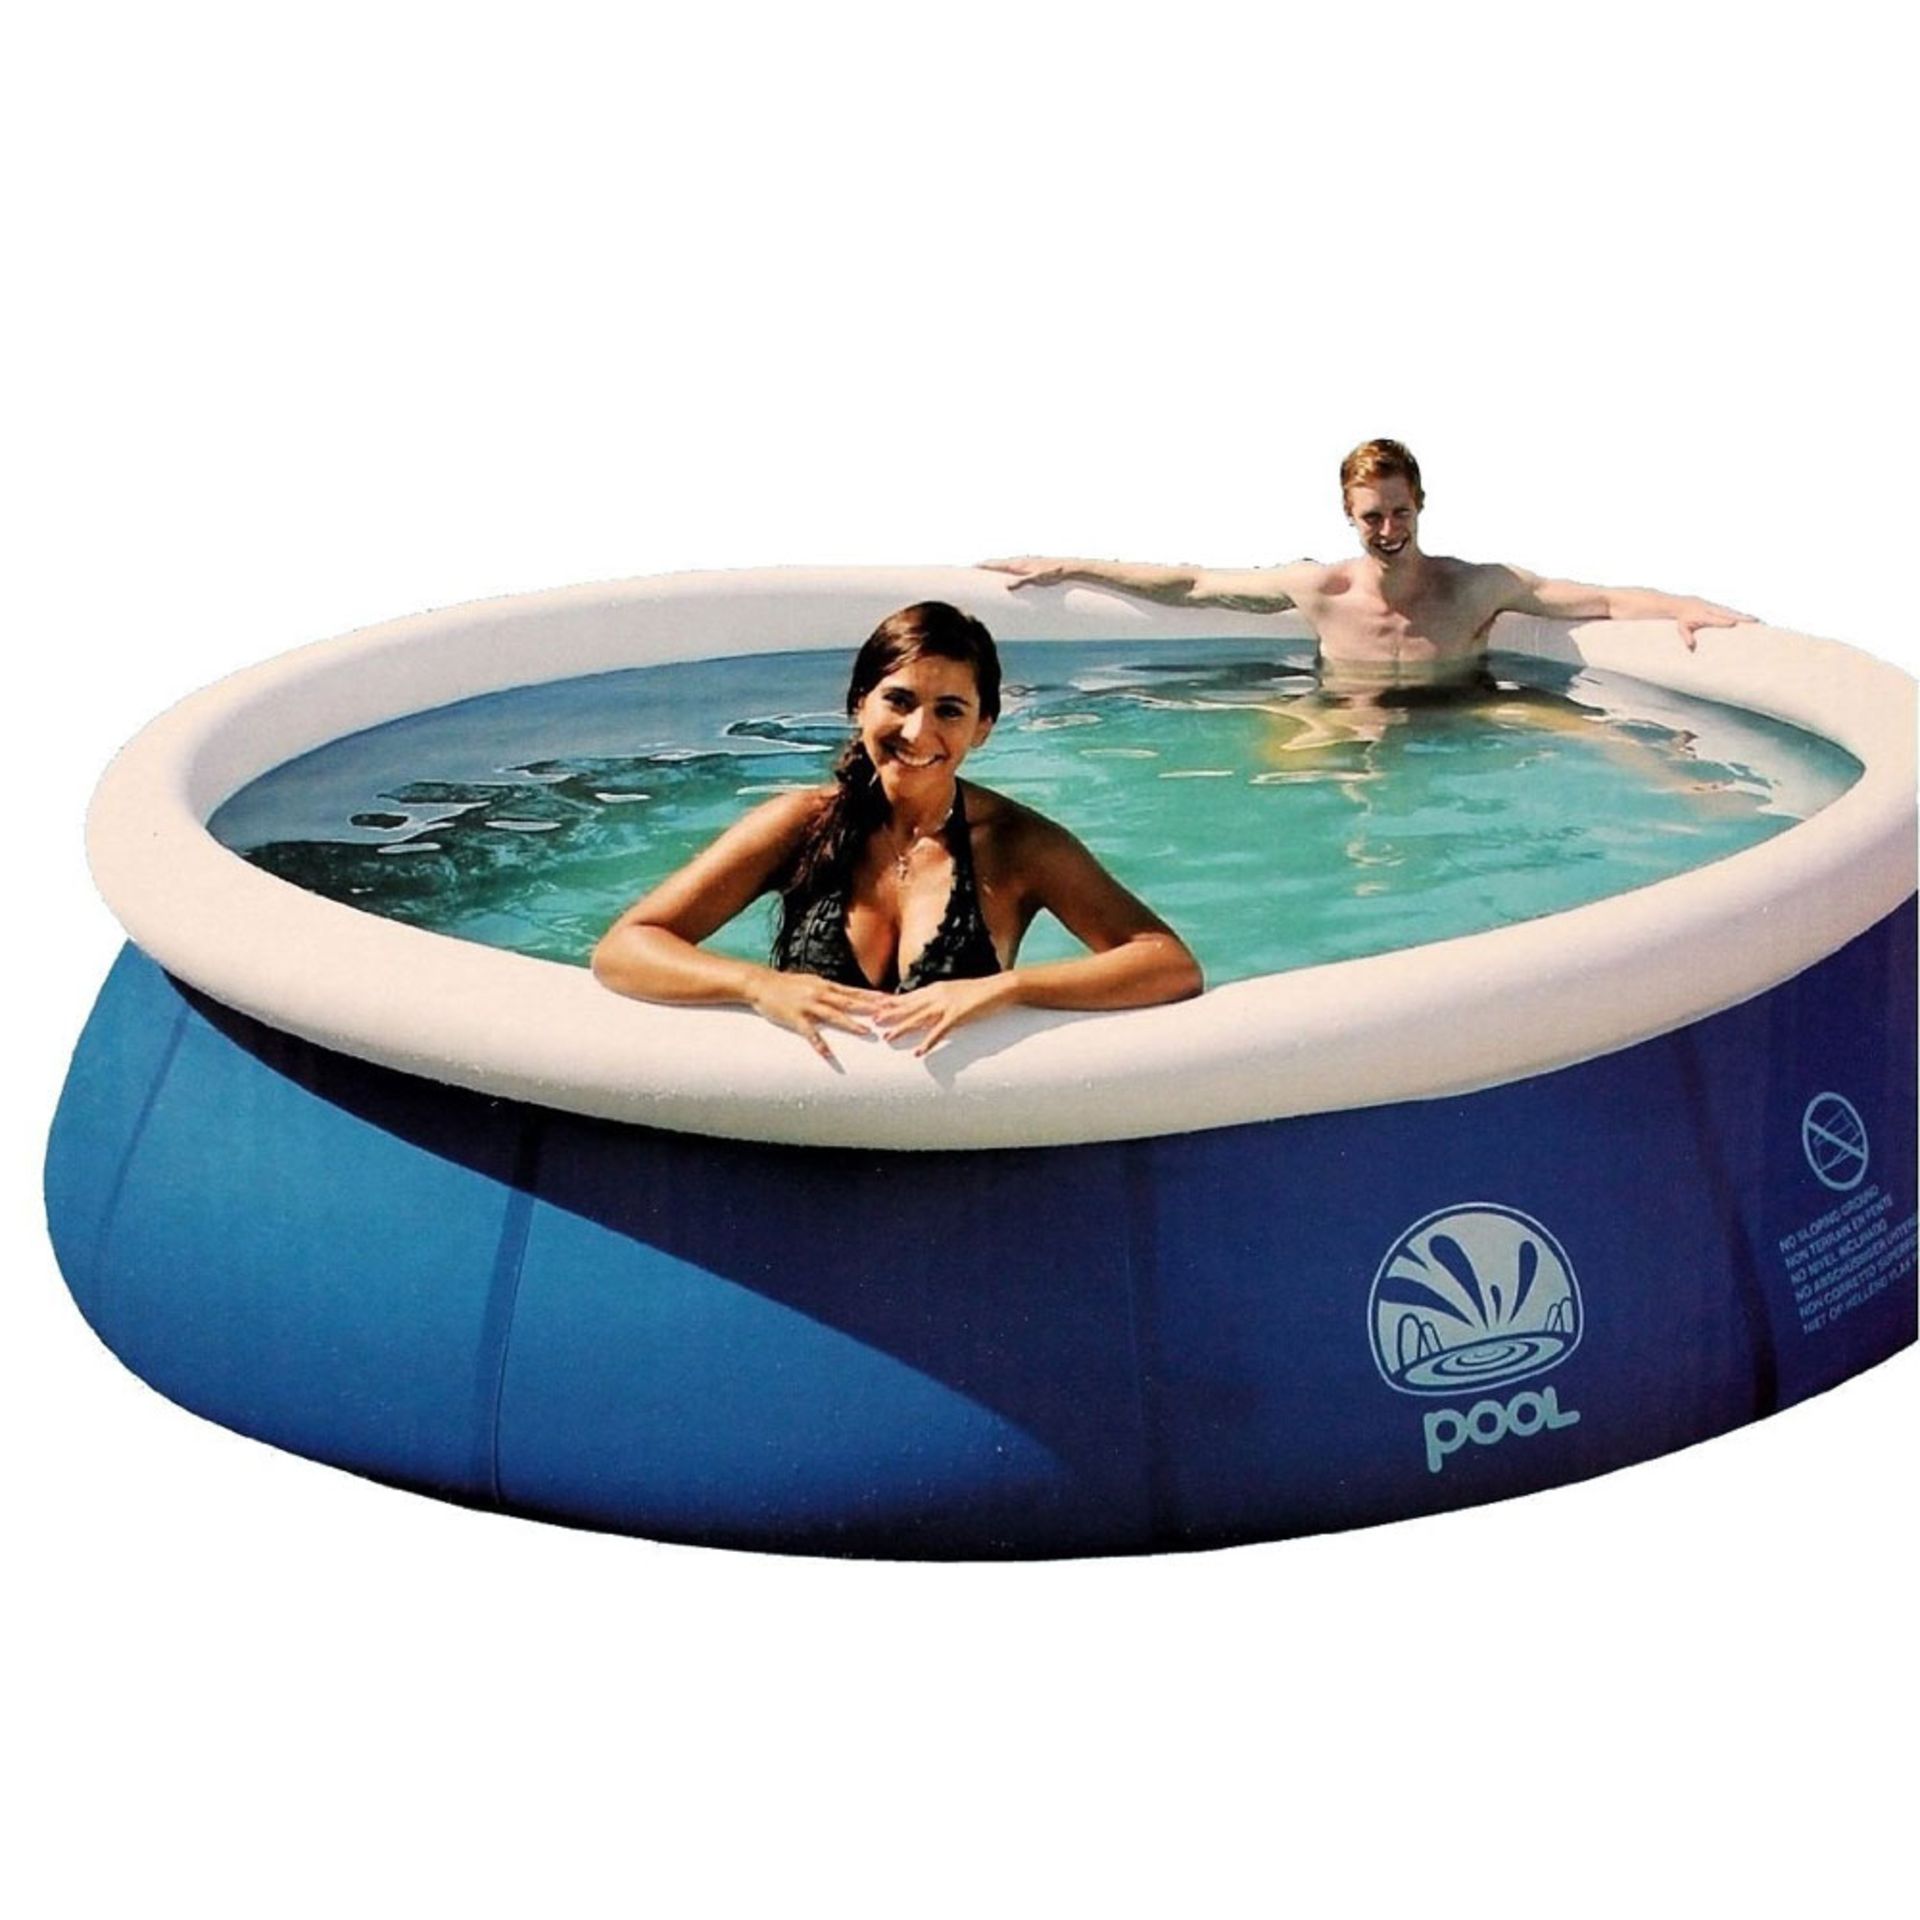 + VAT Brand New 2.4m Quick-up Paddling Pool - Includes Repair Patch - Easy Up Construction - Fast